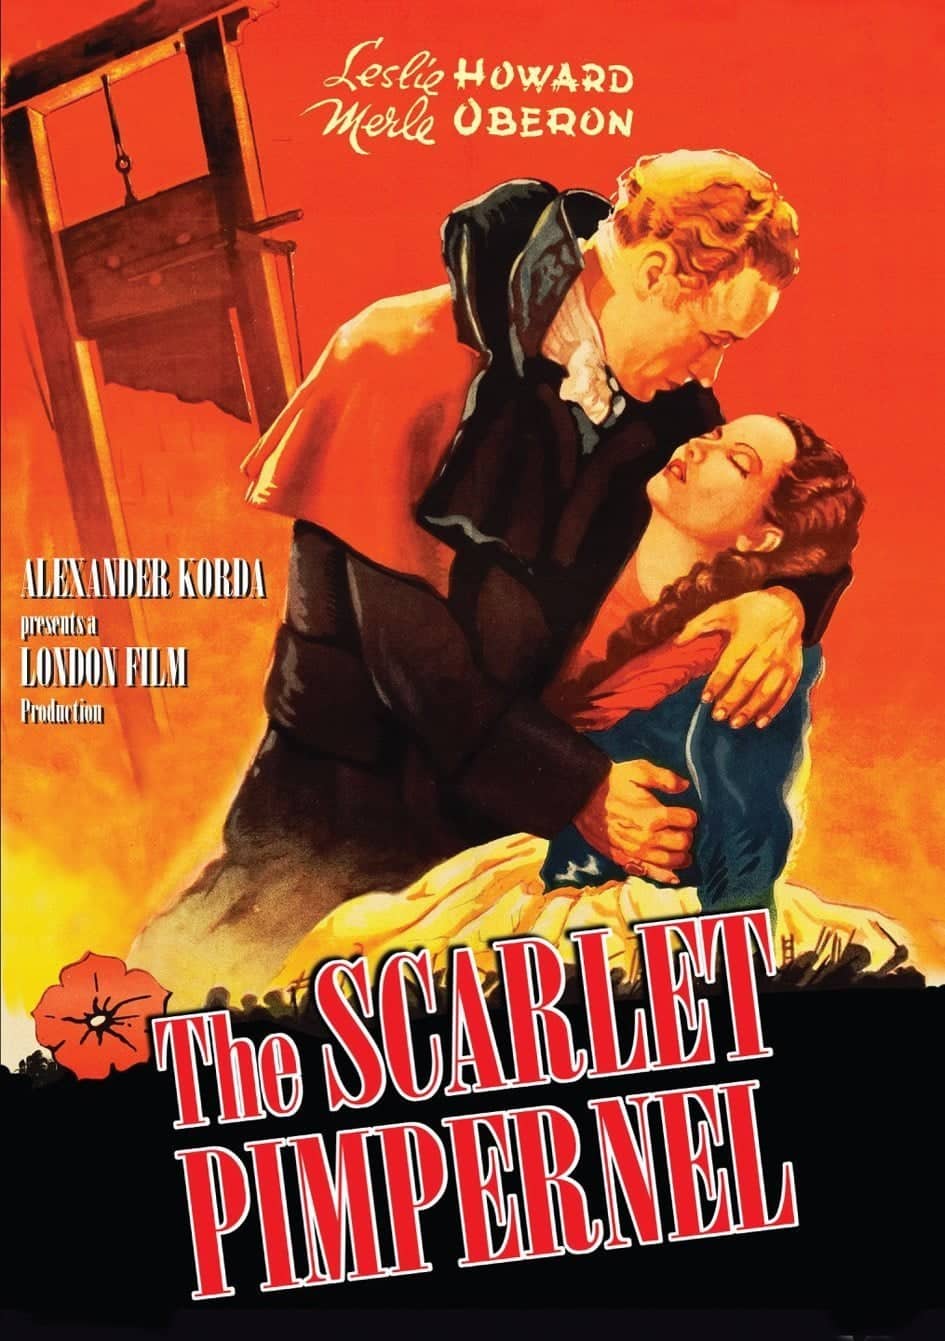 Poster for the movie "The Scarlet Pimpernel"